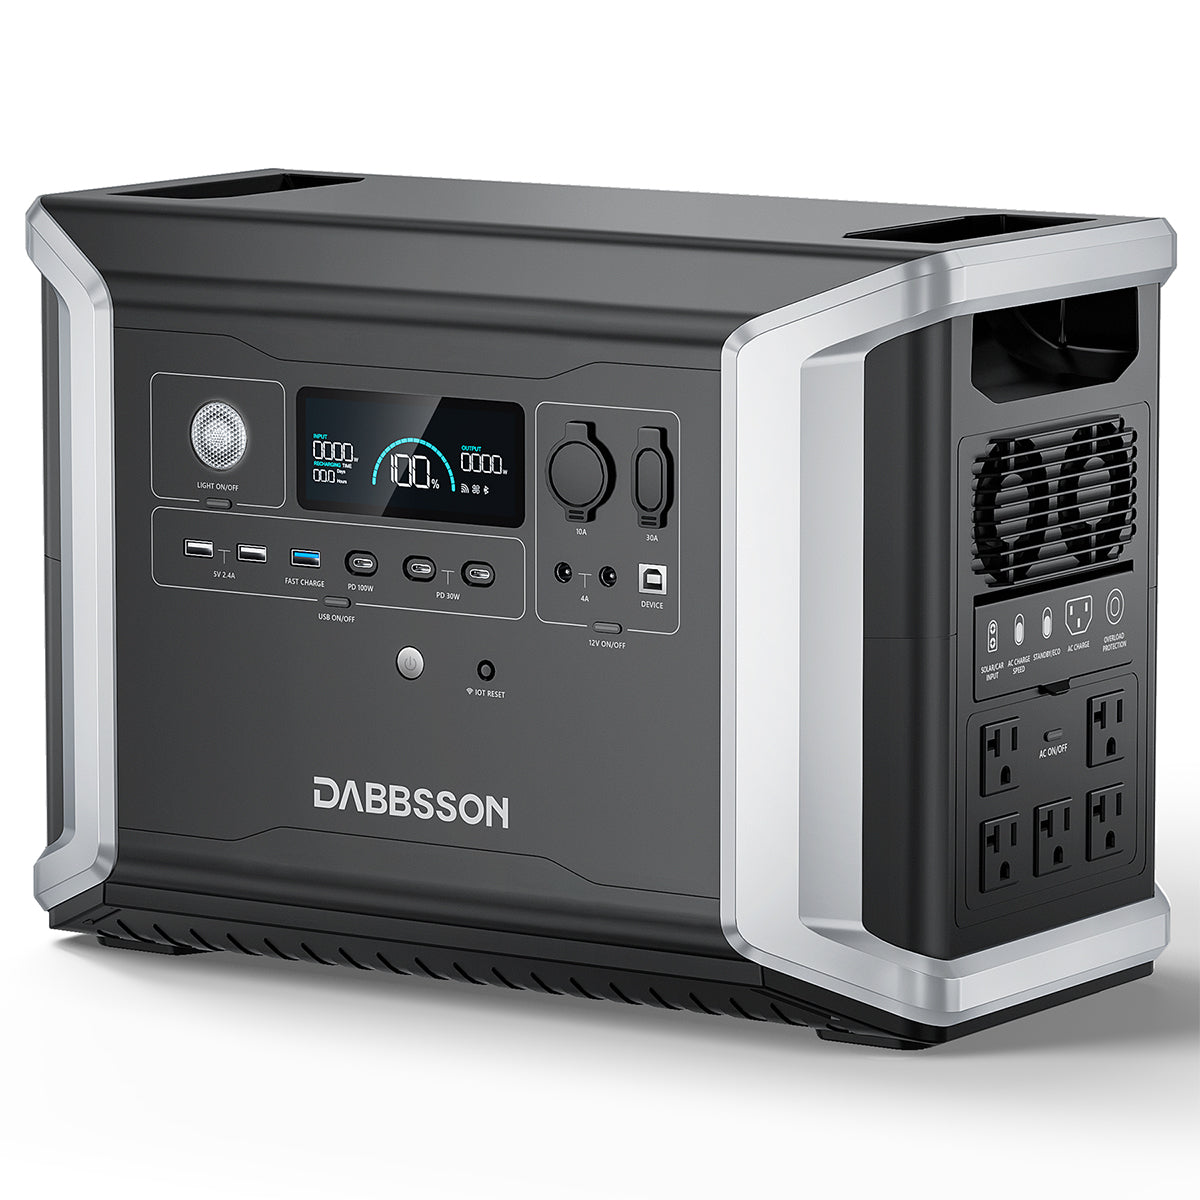 Dabbsson DBS2300 Home Backup Power Station | 2200W, 2330Wh - New Star Living